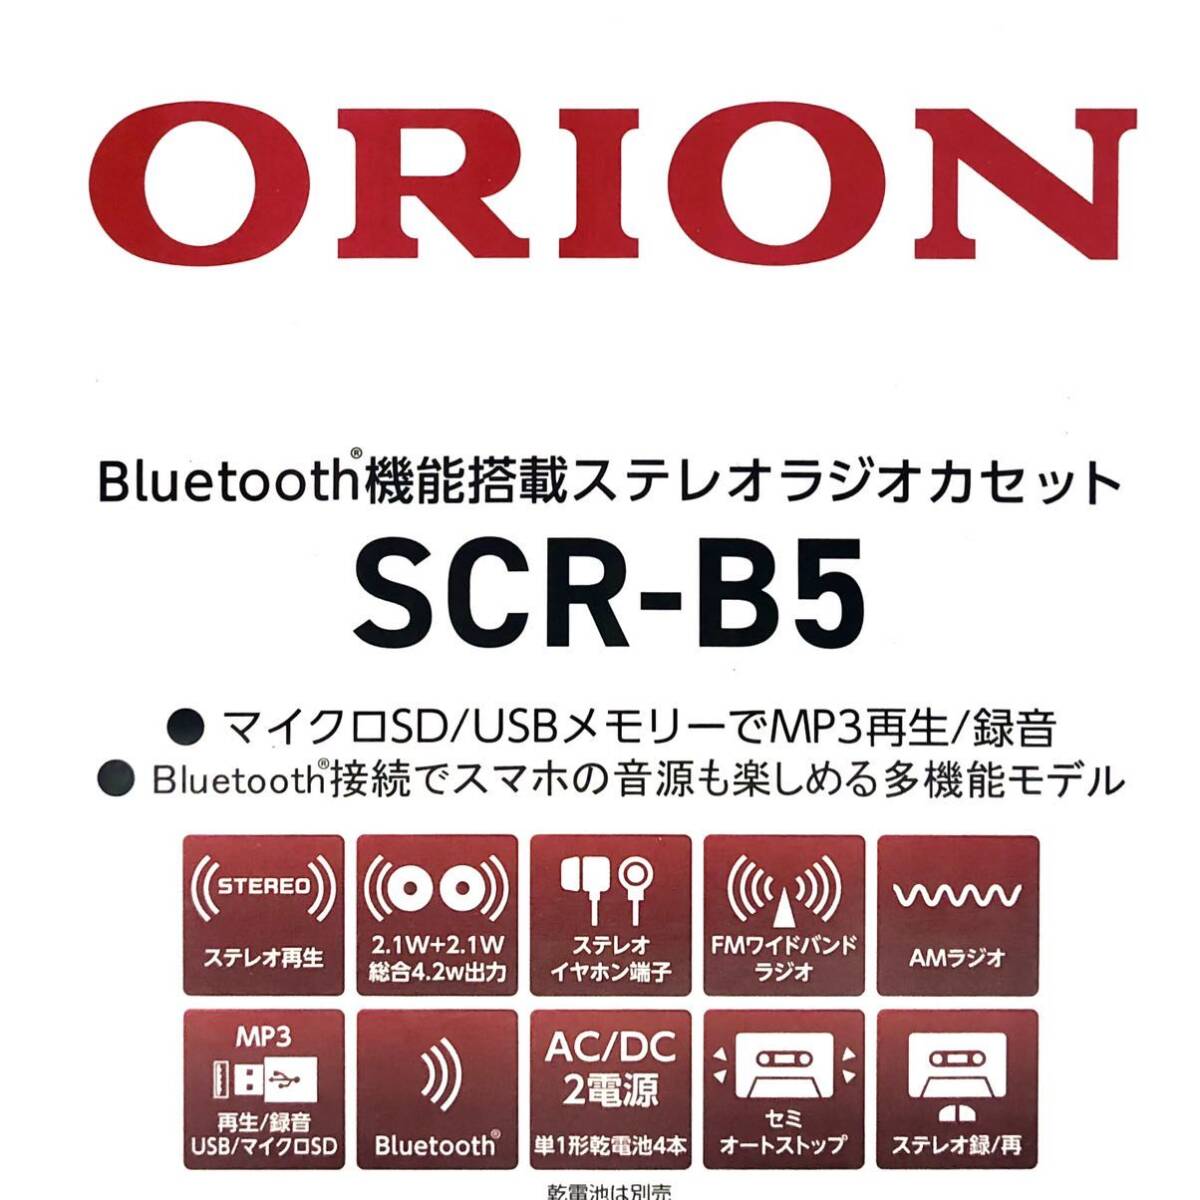 ORION/ Orion Bluethooth installing stereo radio-cassette SCR-B5 wide FM correspondence LED level meter used operation goods 